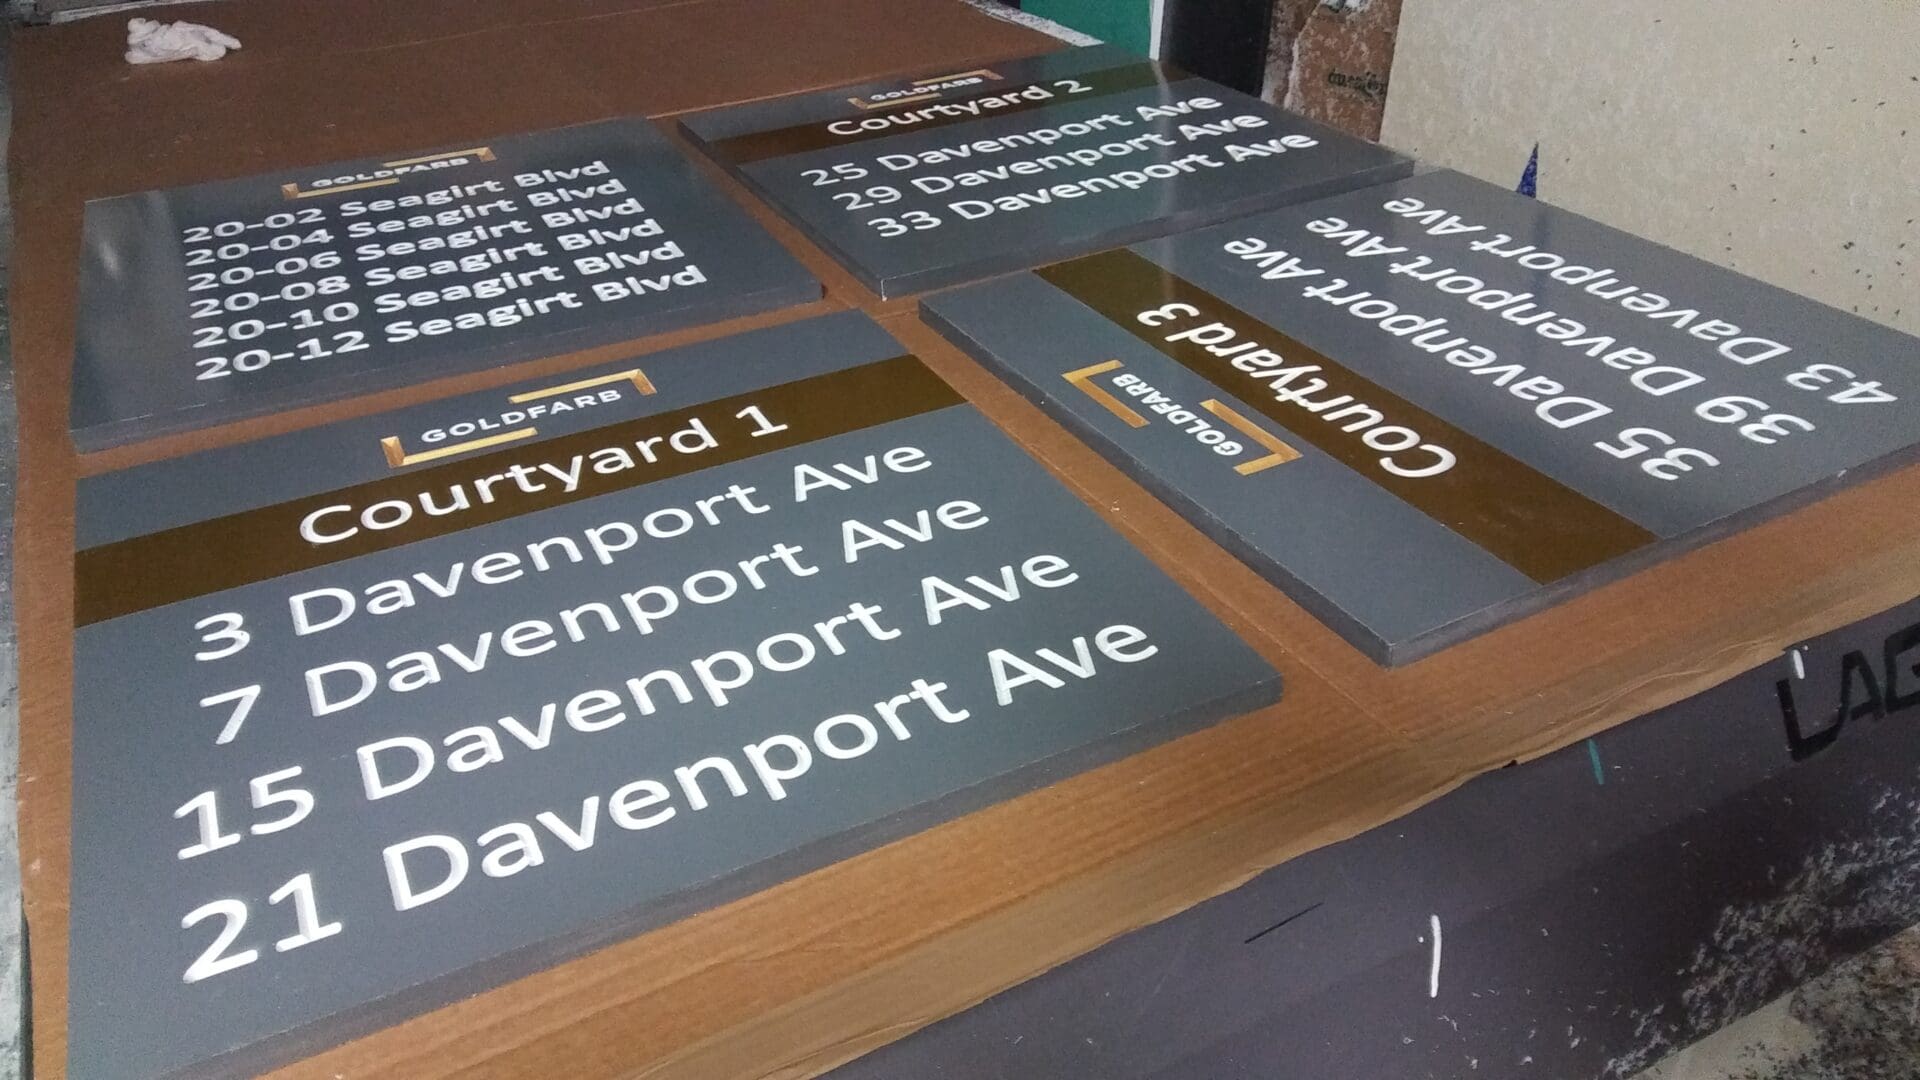 Stack of various street signs on a concrete floor, including multiple signs for Davenport Ave with different house numbers, curated for the ADP USA Solutions Gallery.